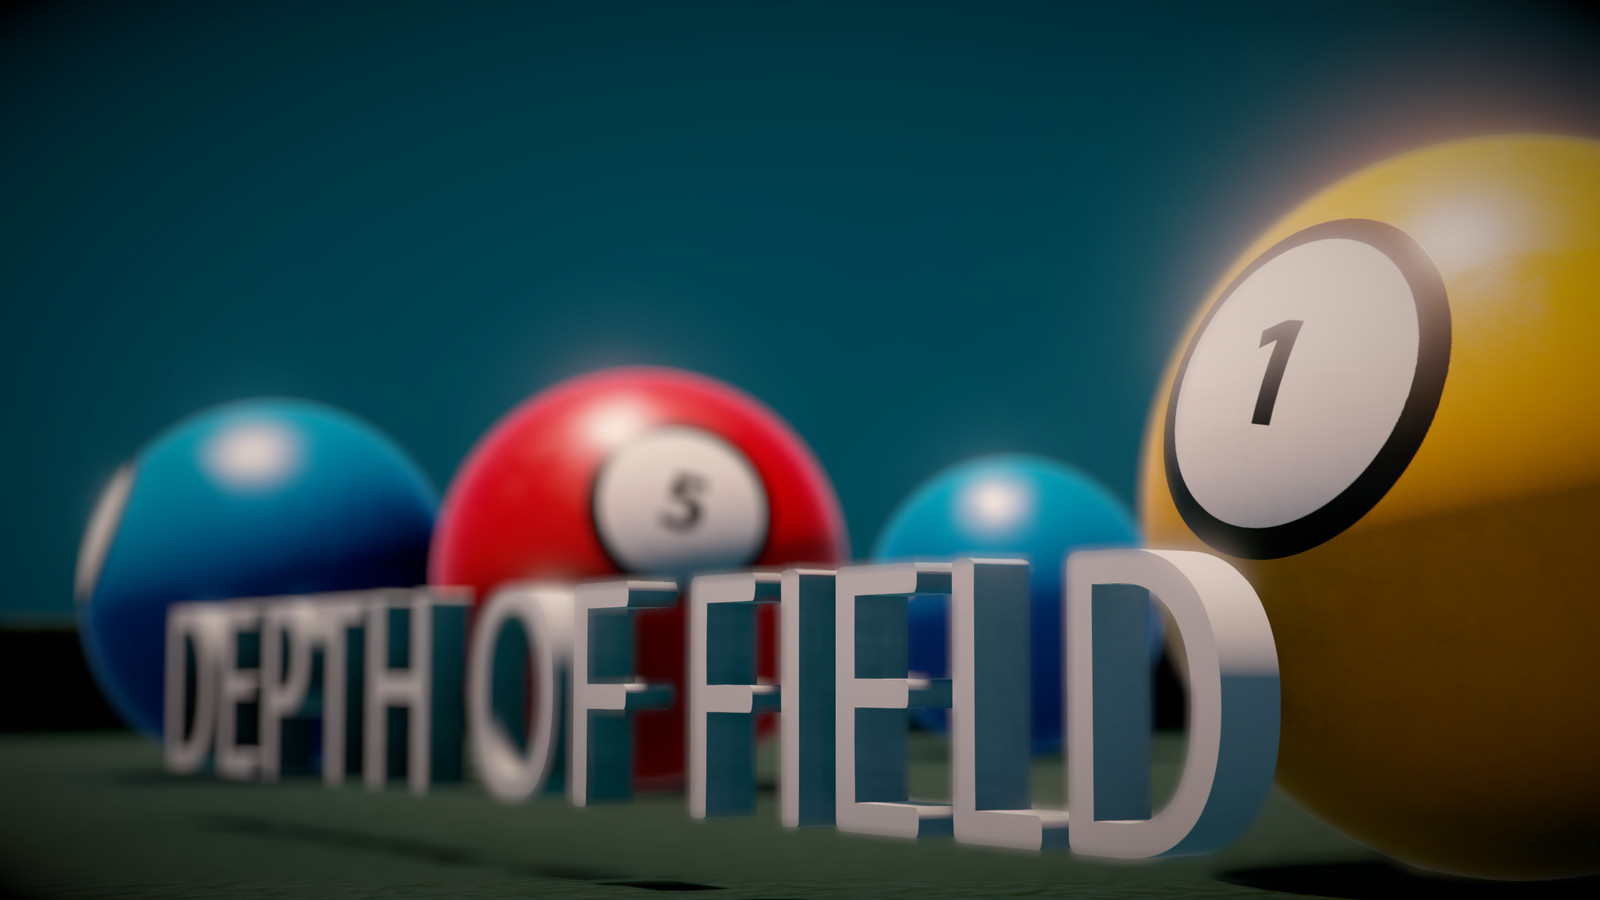 Physical Depth of Field